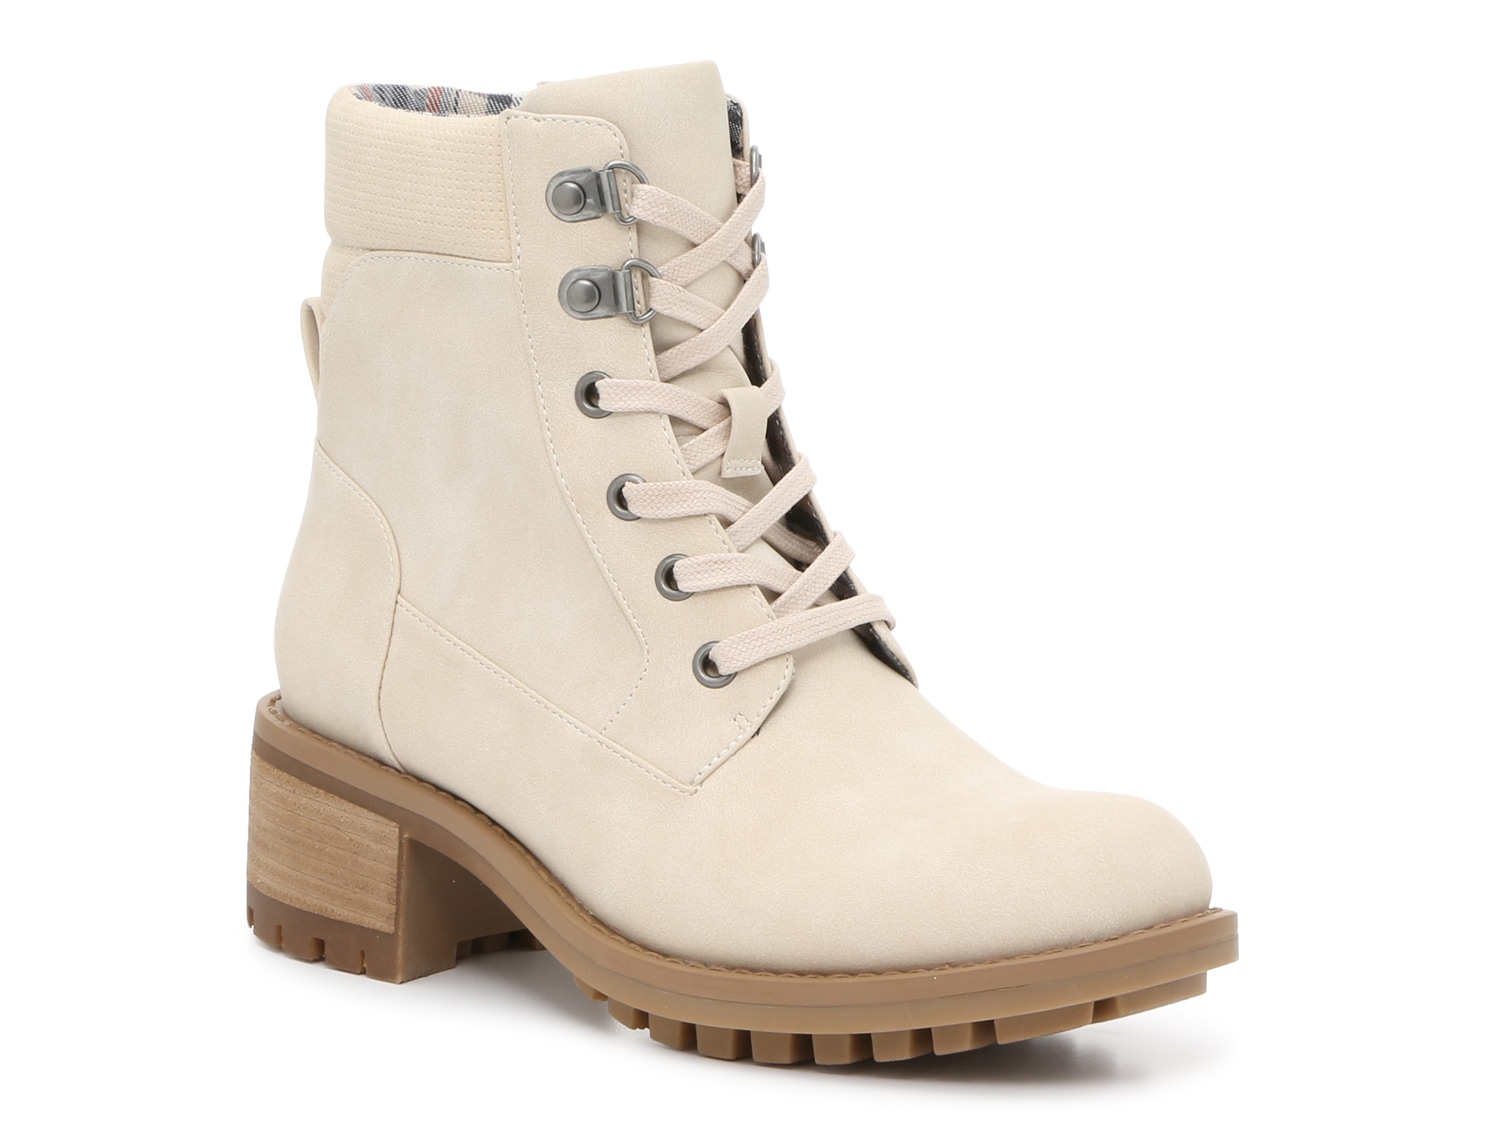 Crown Vintage Marley Bootie - Free Shipping | DSW